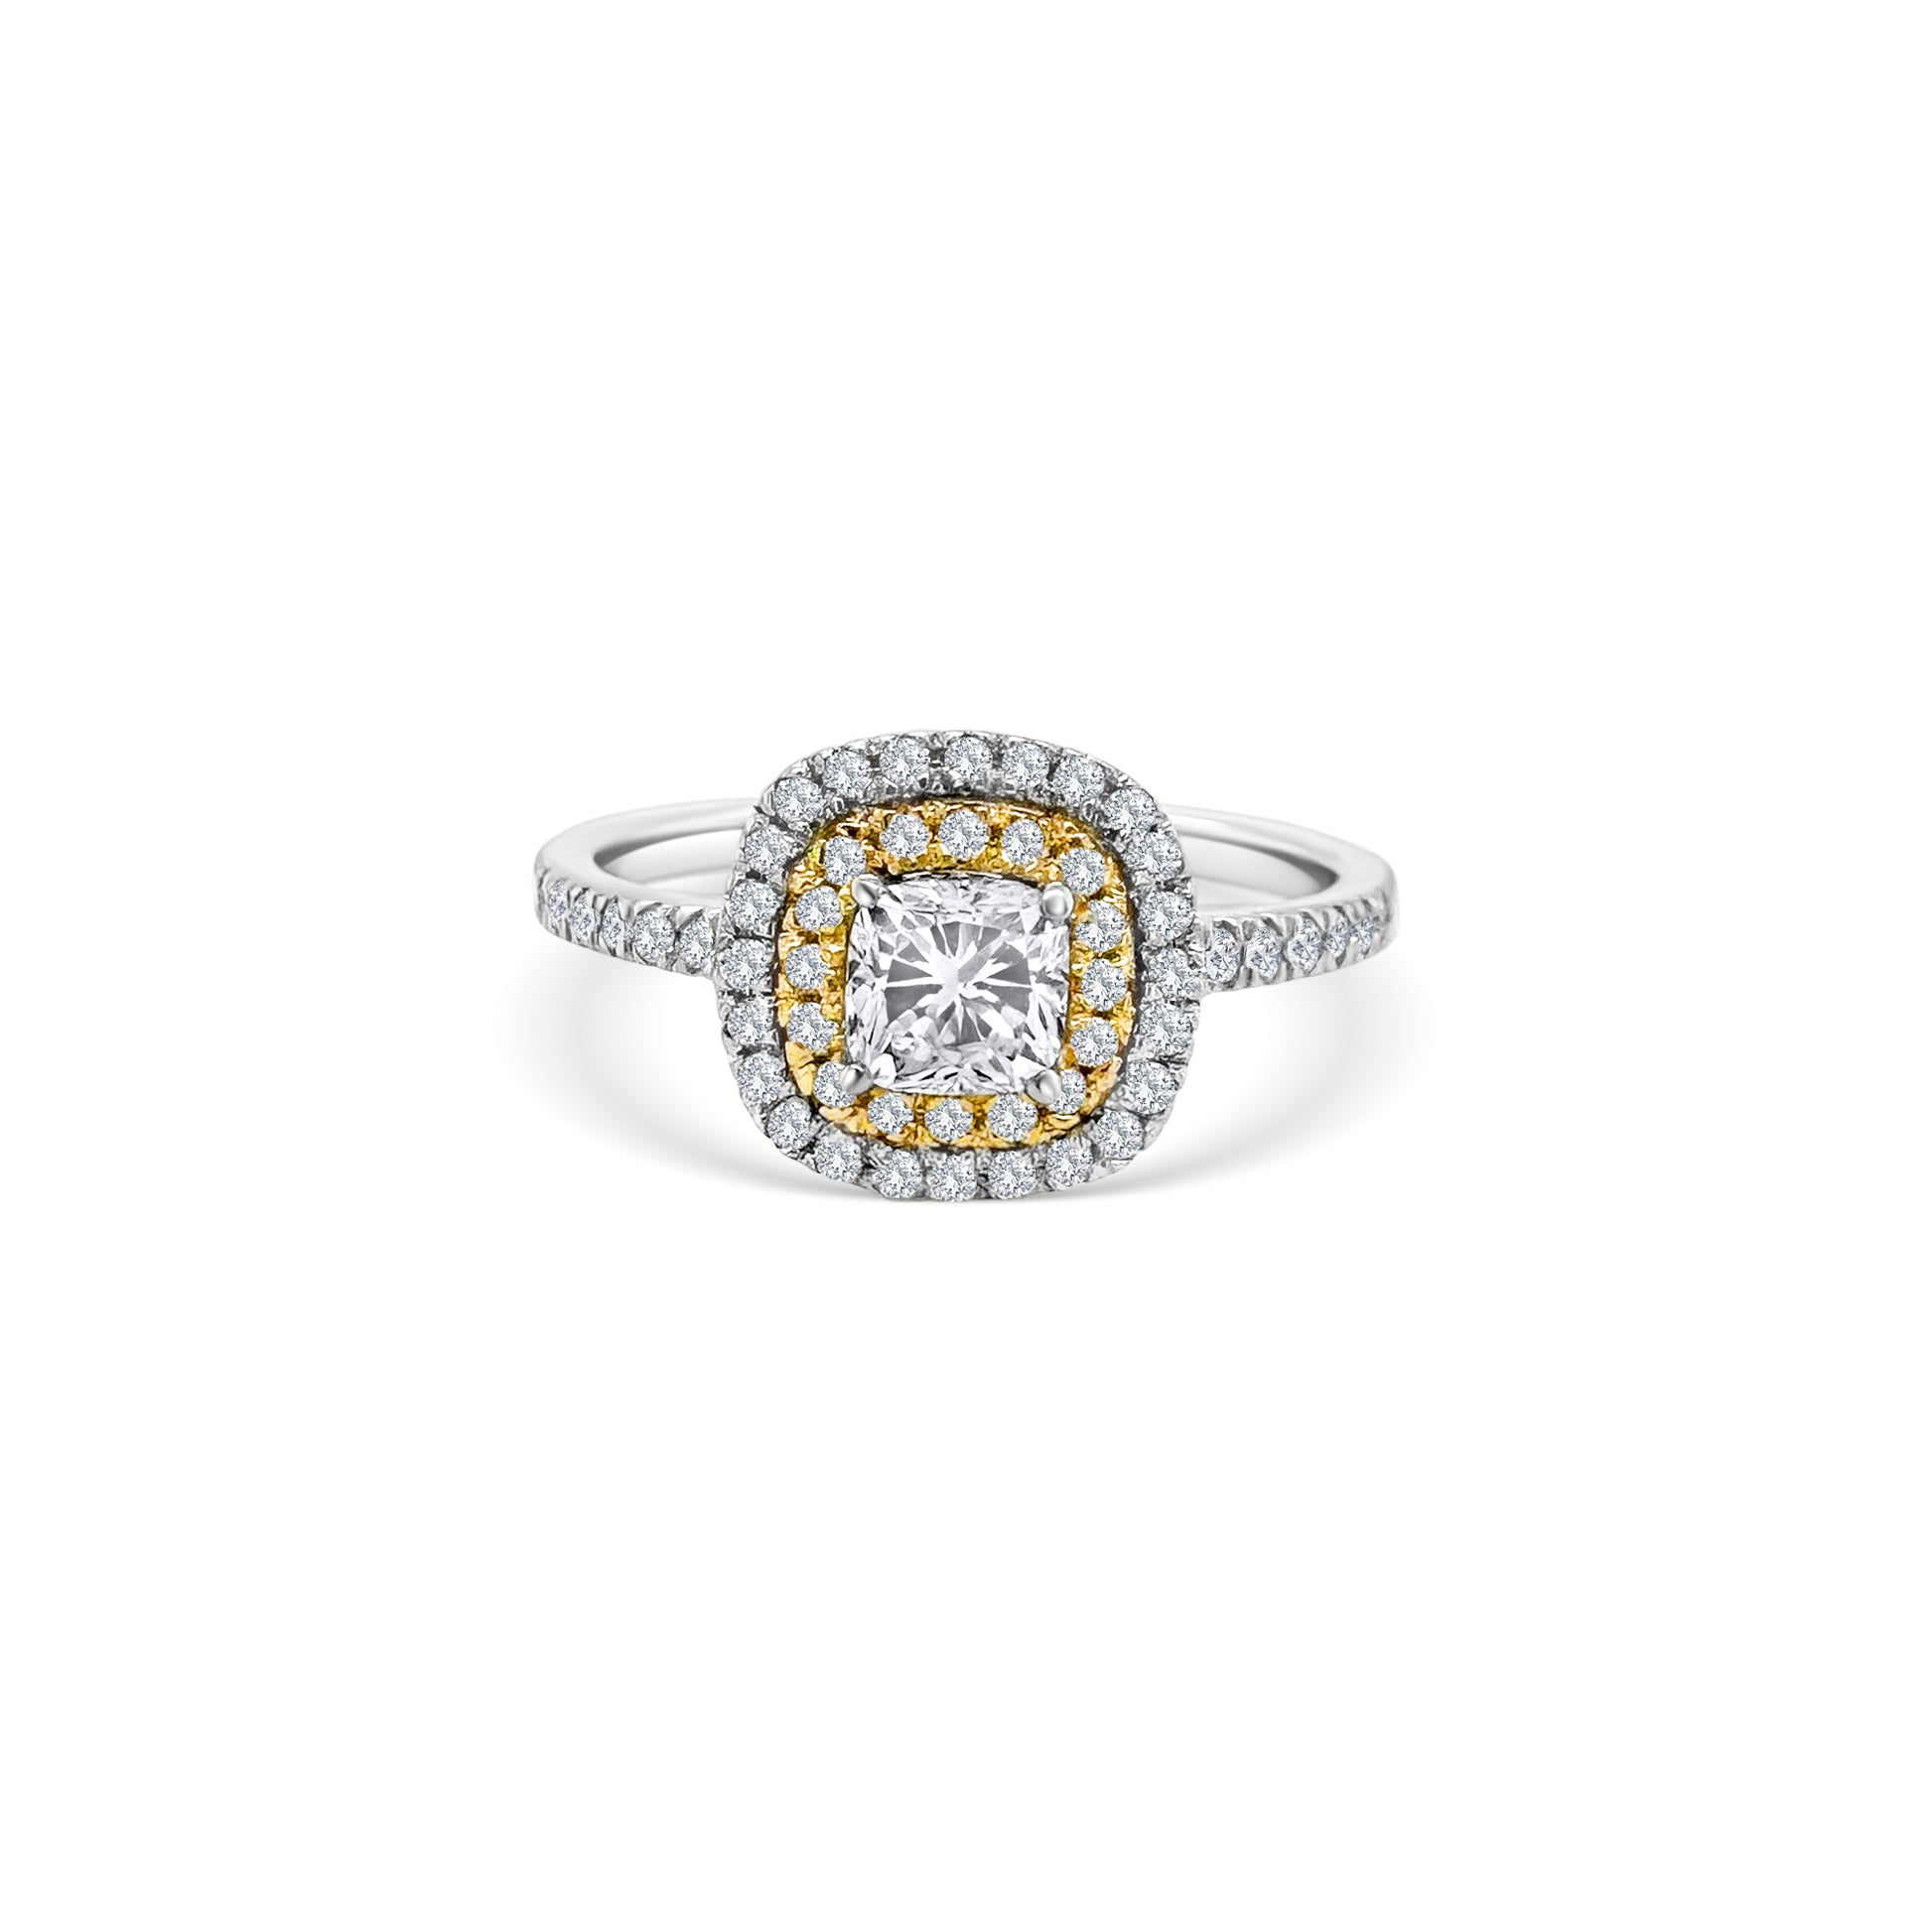 A stunning cushion-cut diamond ring, featuring a double halo design, crafted to perfection, ideal for special occasions, showcasing timeless elegance, with brilliant sparkle, making a statement, symbolizing everlasting love.